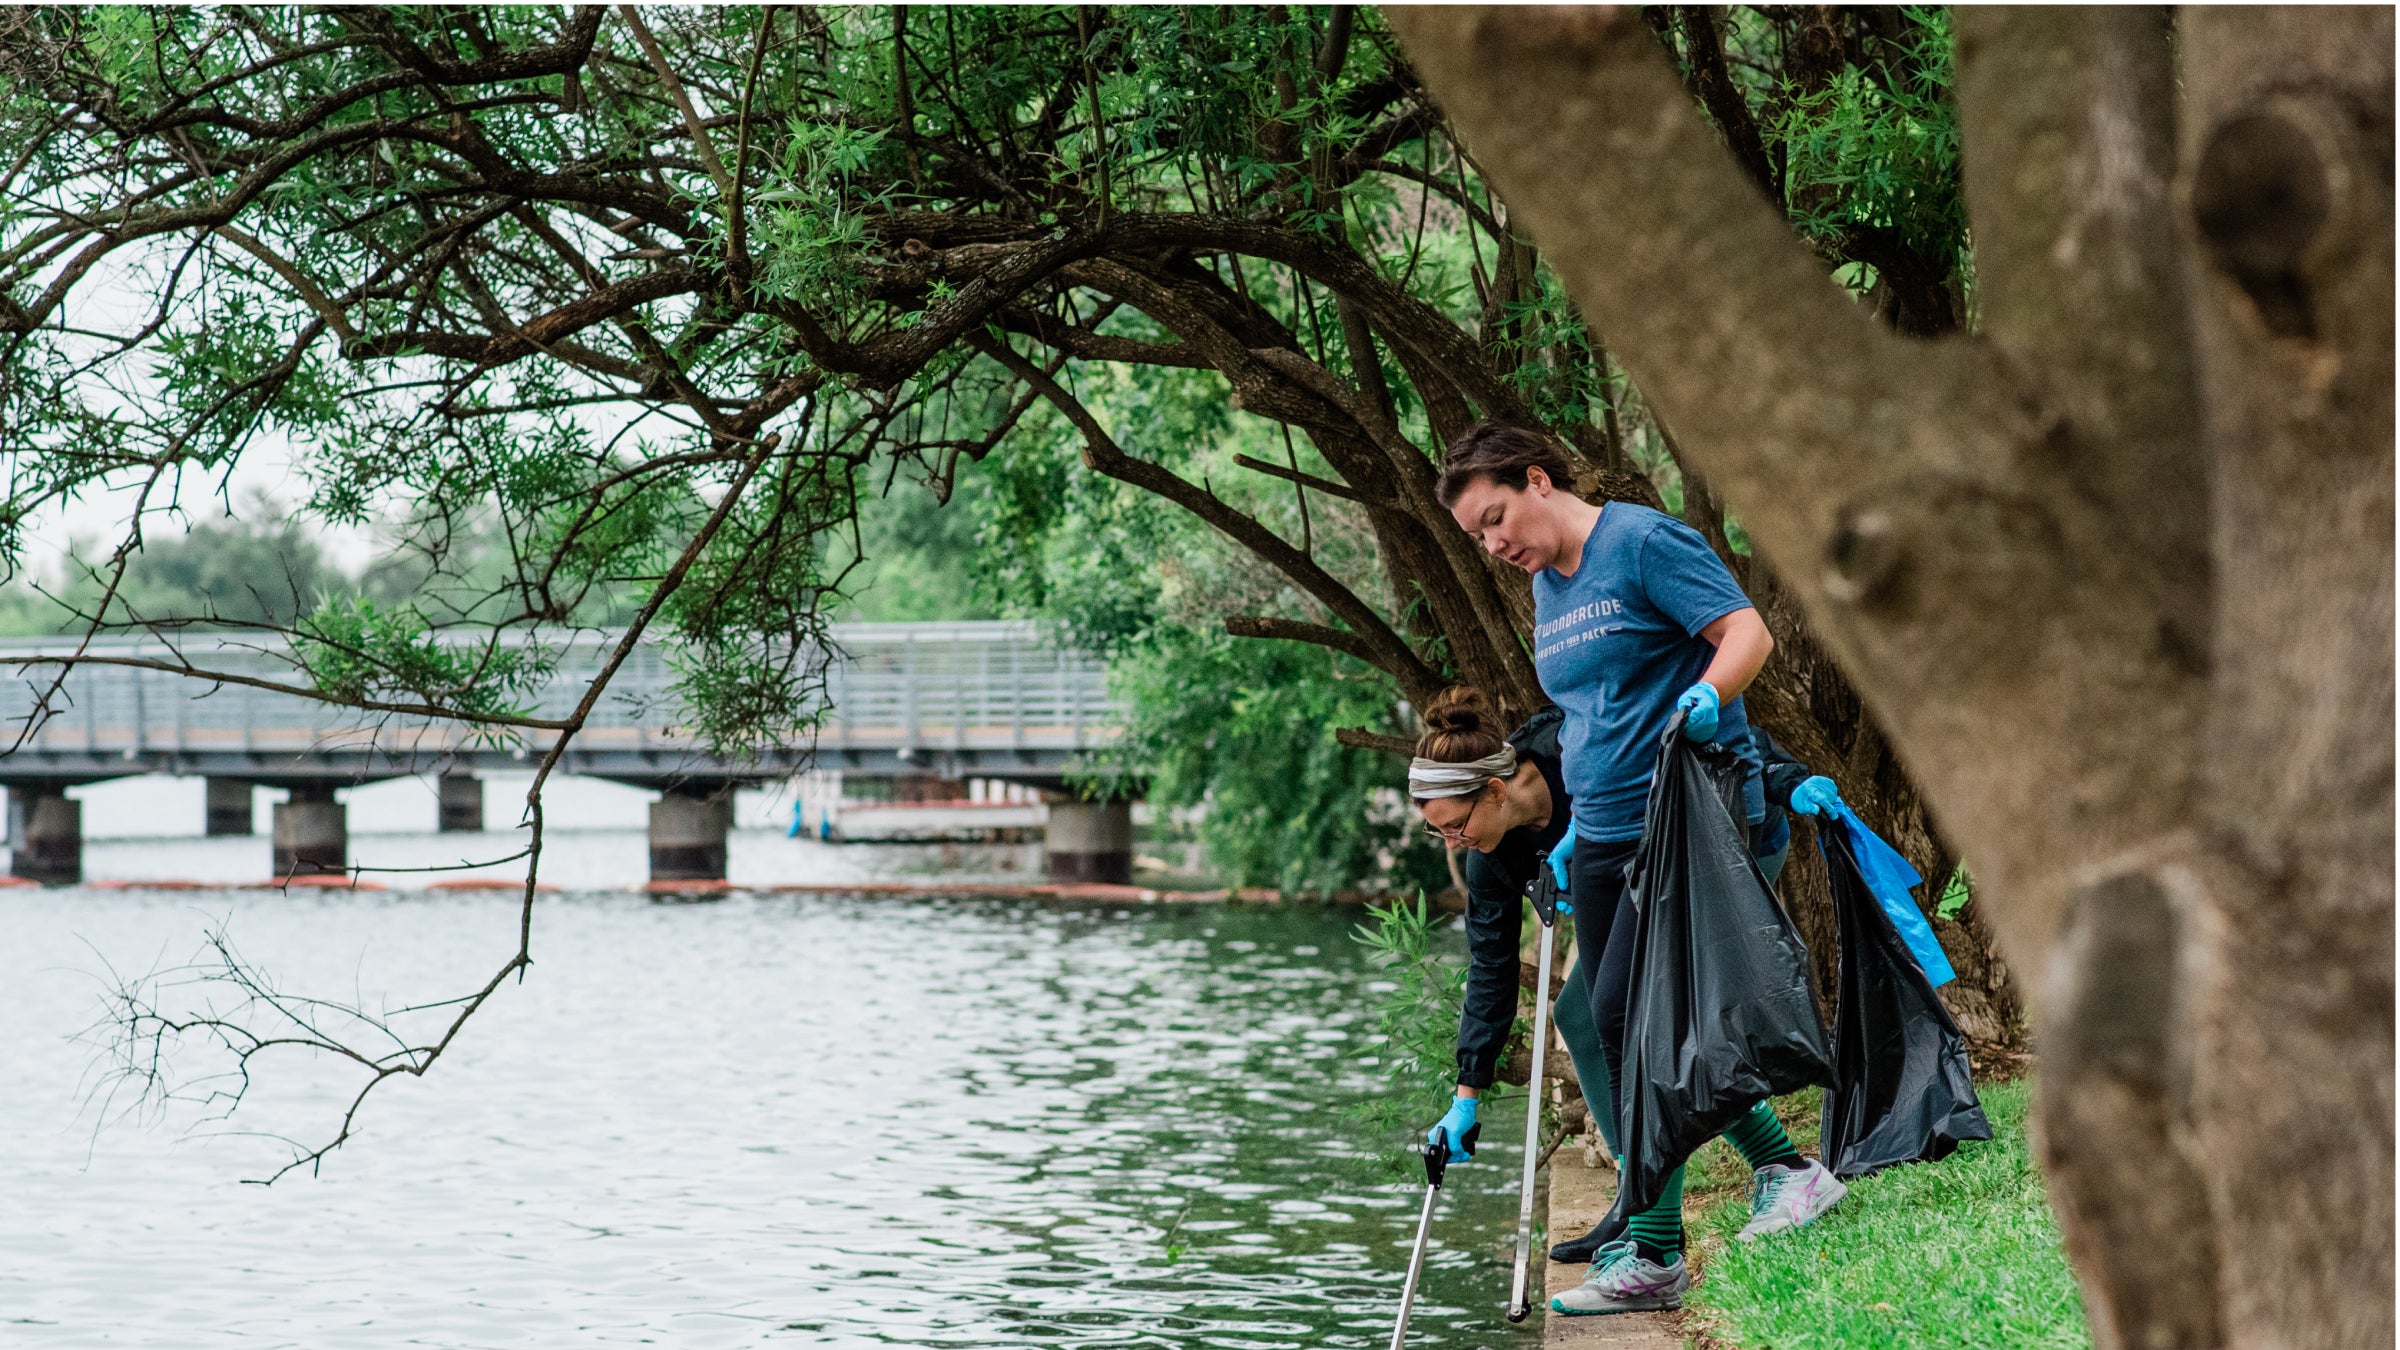 Two Wondercide employees pick up litter from the river edge in Austin Texas